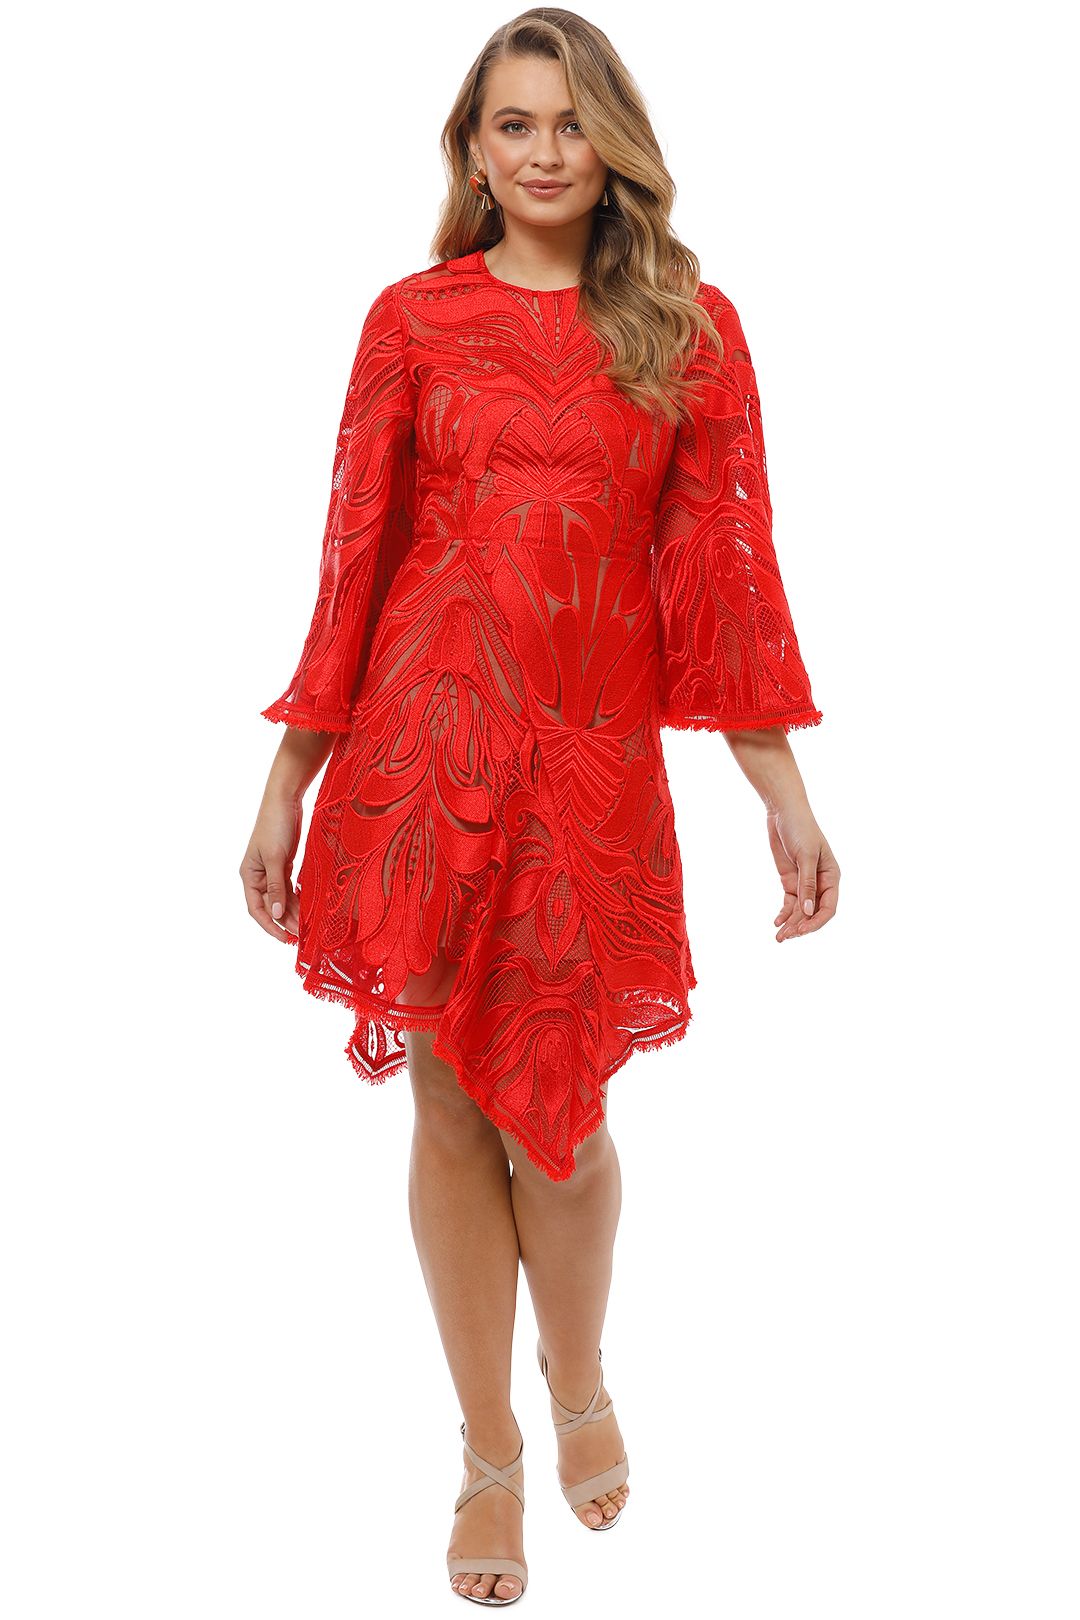 Talulah - Carnation Flared Sleeve Mini Dress - Red - Front